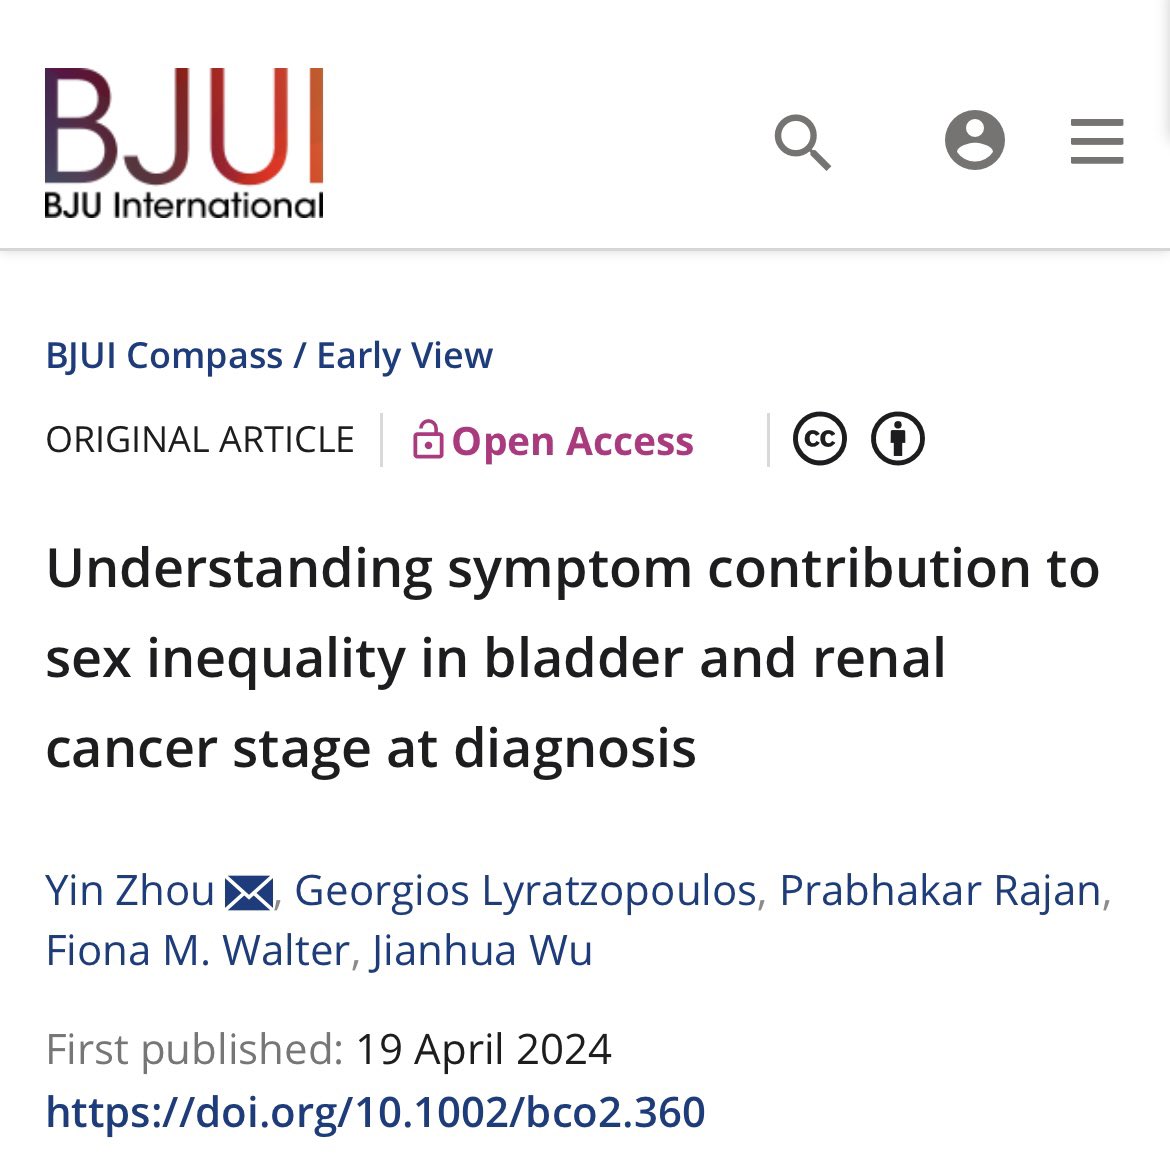 #Sexinequality in #bladdercancer diagnosis may be due to differences in #haematuria frequency and onset between men and women. @GLyratzopoulos @fmw22 @JianhuaWu6 @QMUL_WIPH @QMUL_CCSPED More in our new @BJUICompass paper: doi.org/10.1002/bco2.3…